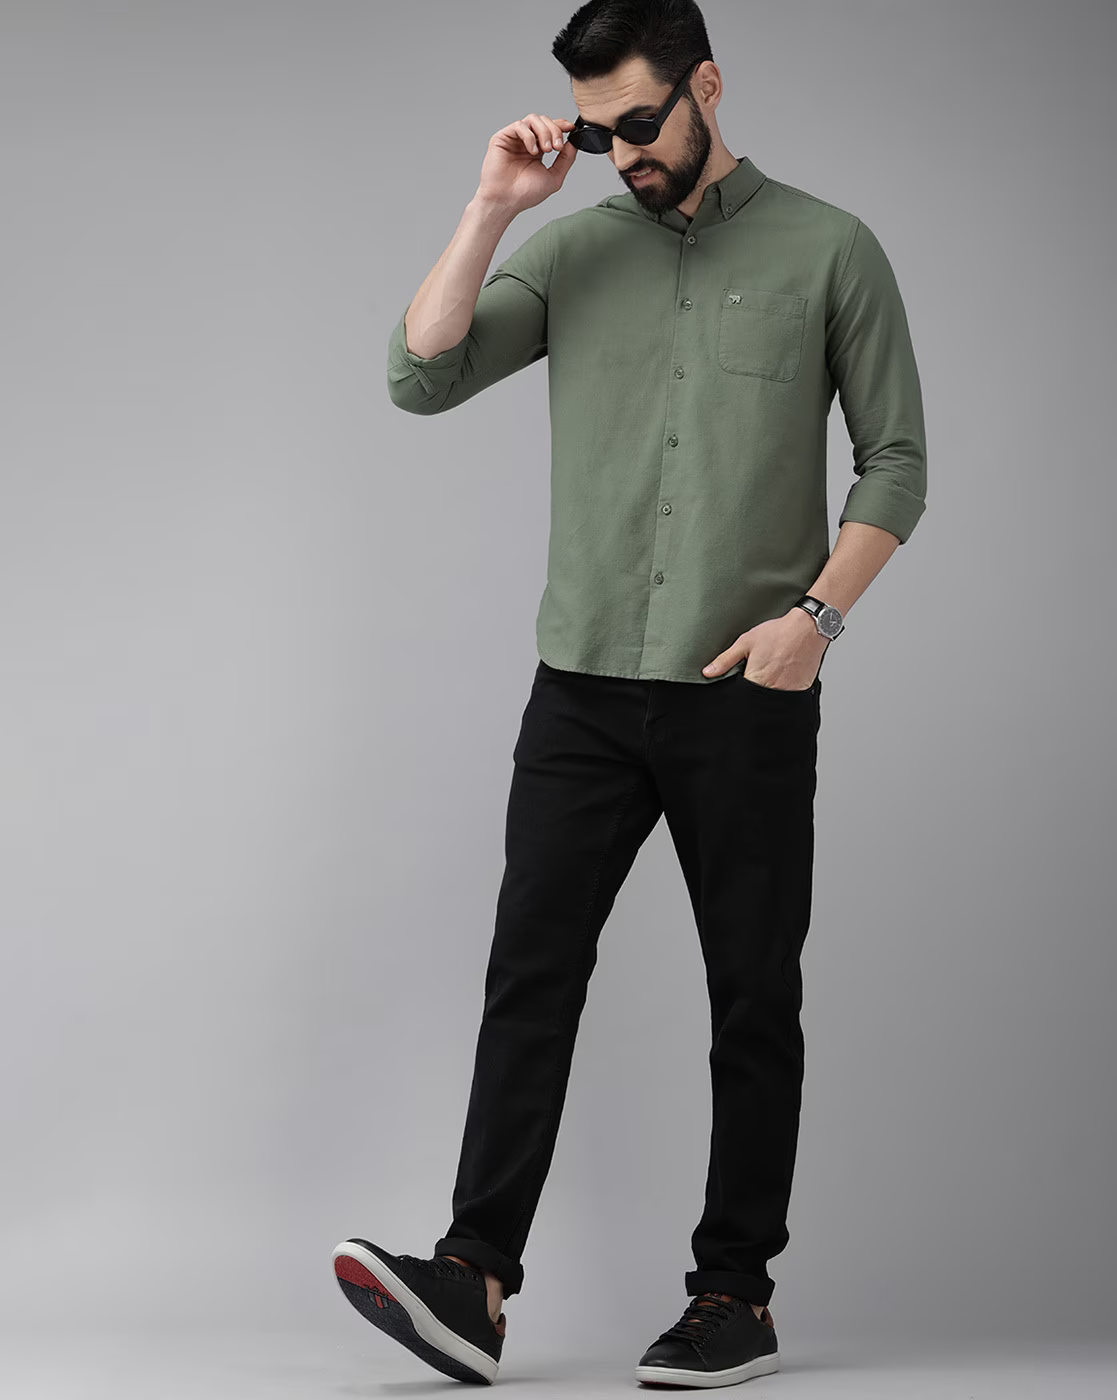 Men's Slim Fit Shirt with Patch Pocket - Olive Green